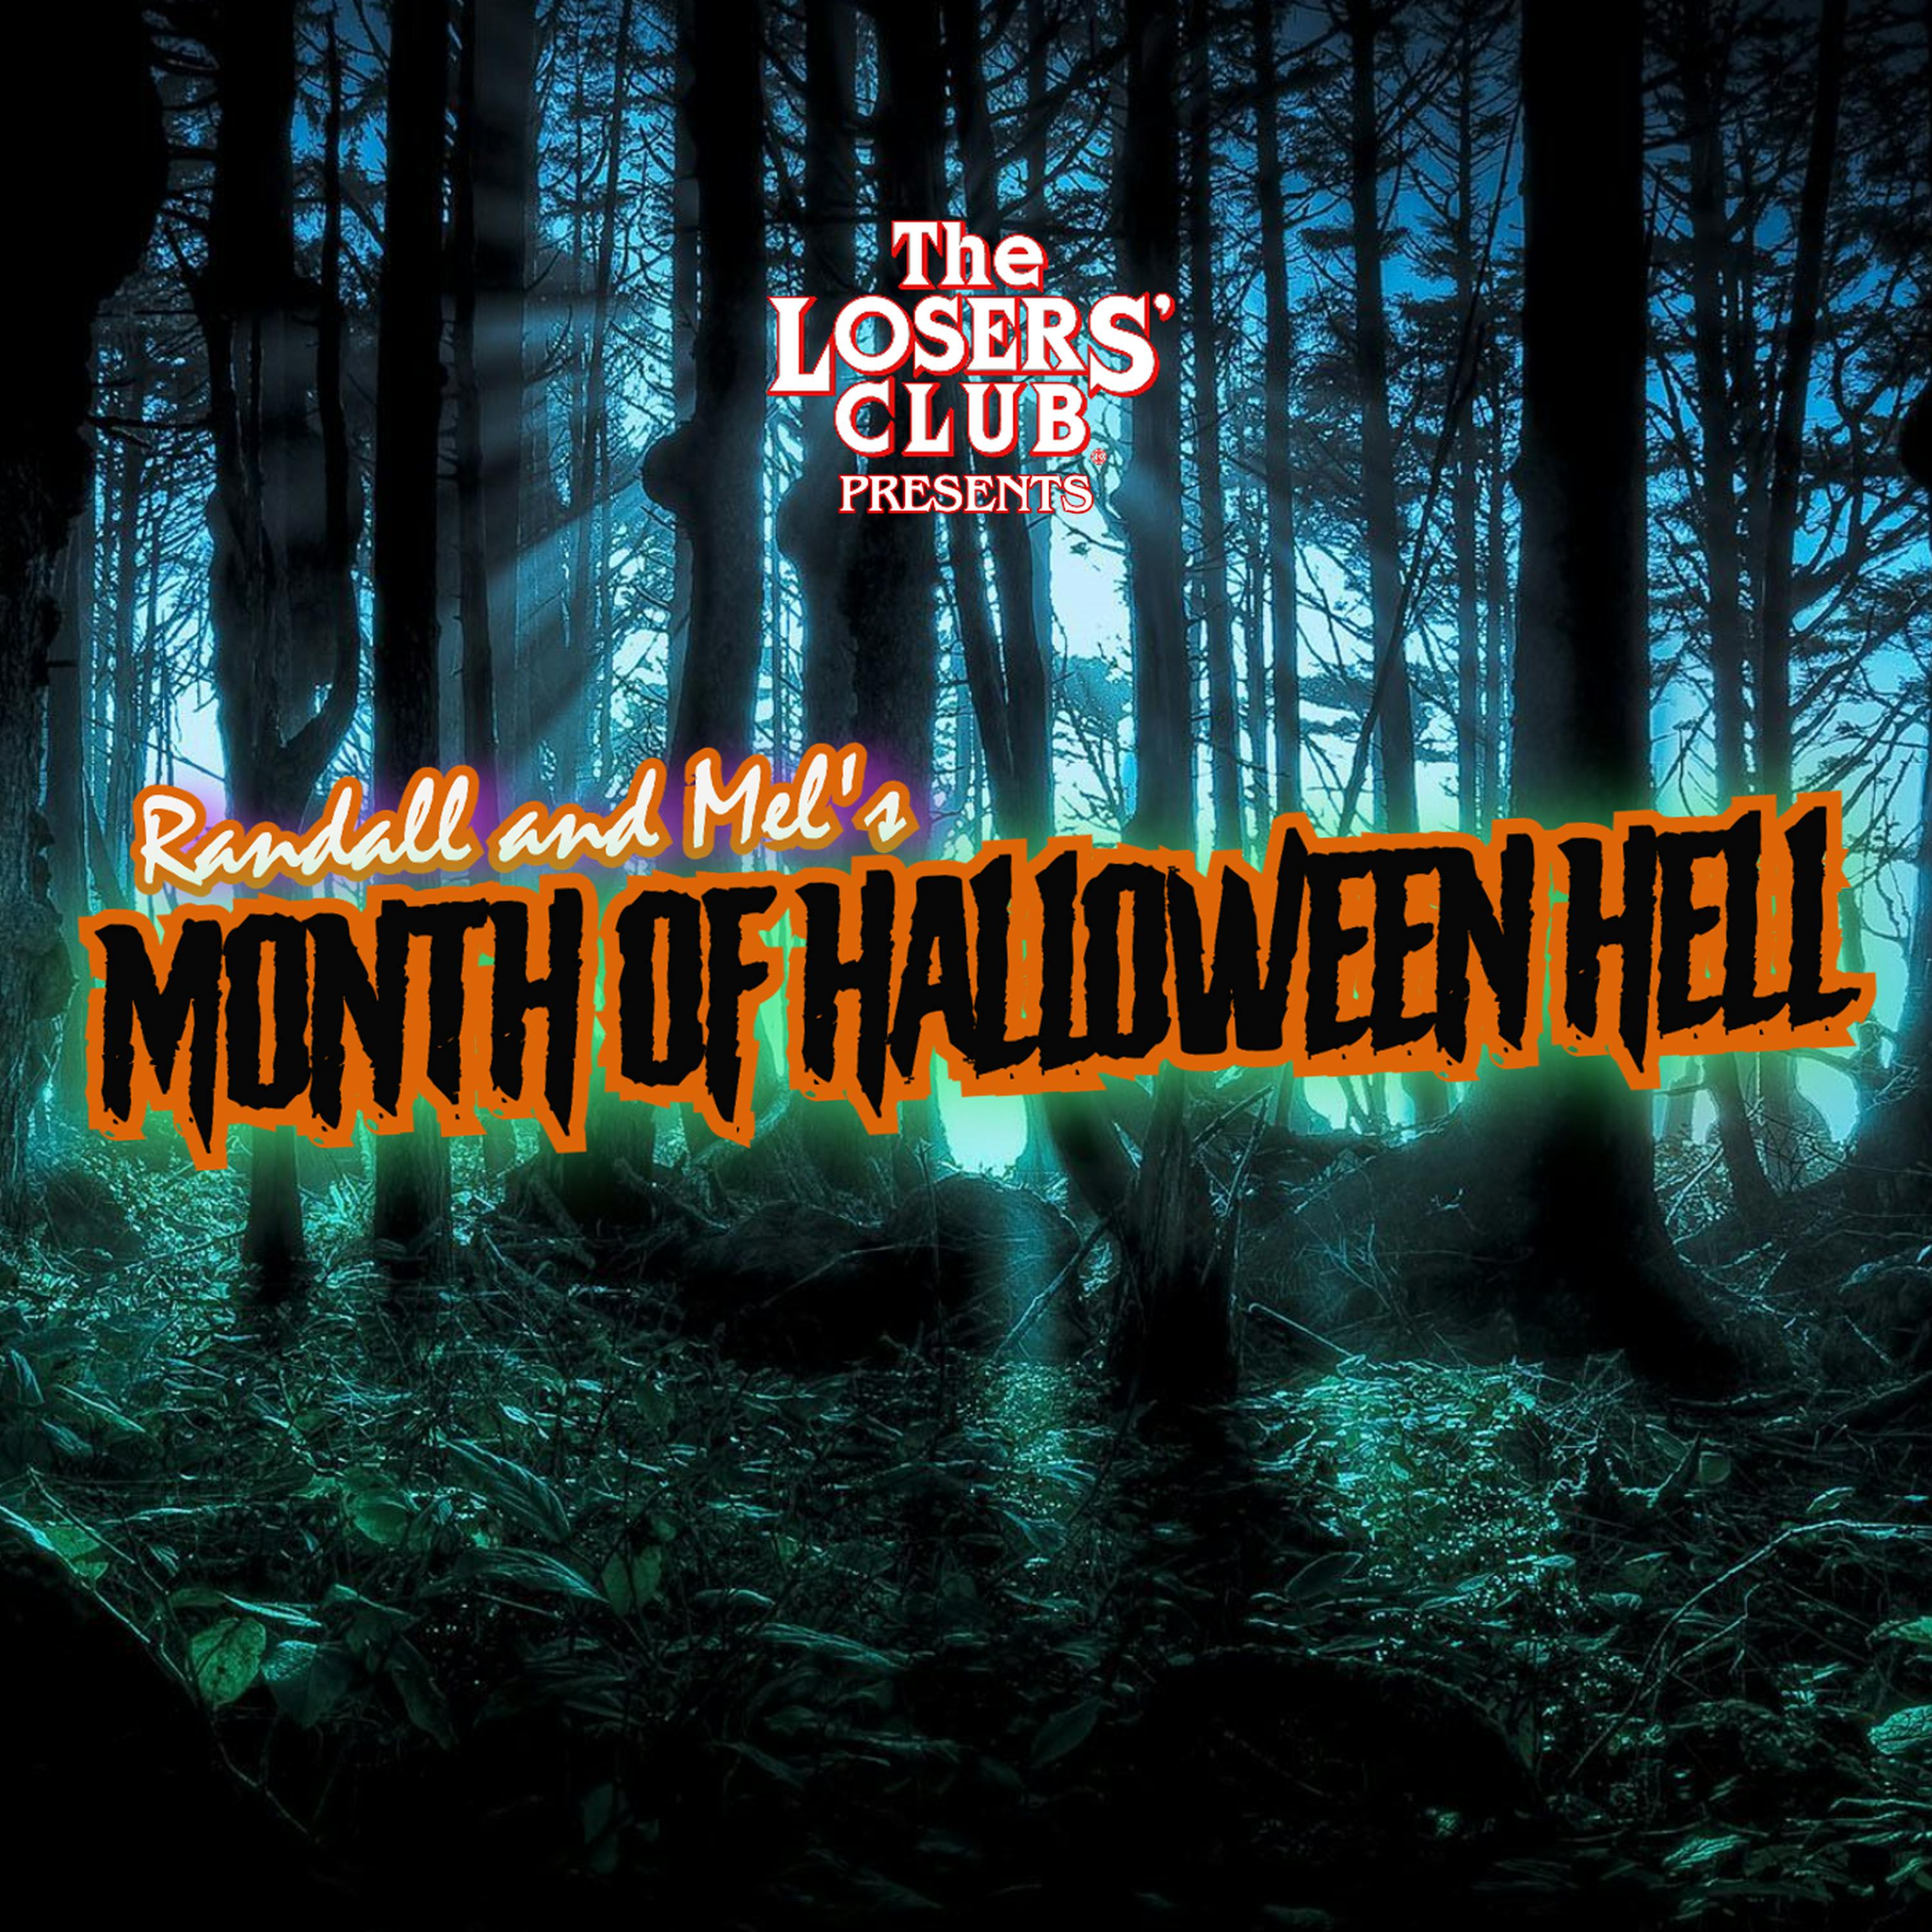 Introducing Randall and Mel's Month of Halloween Hell